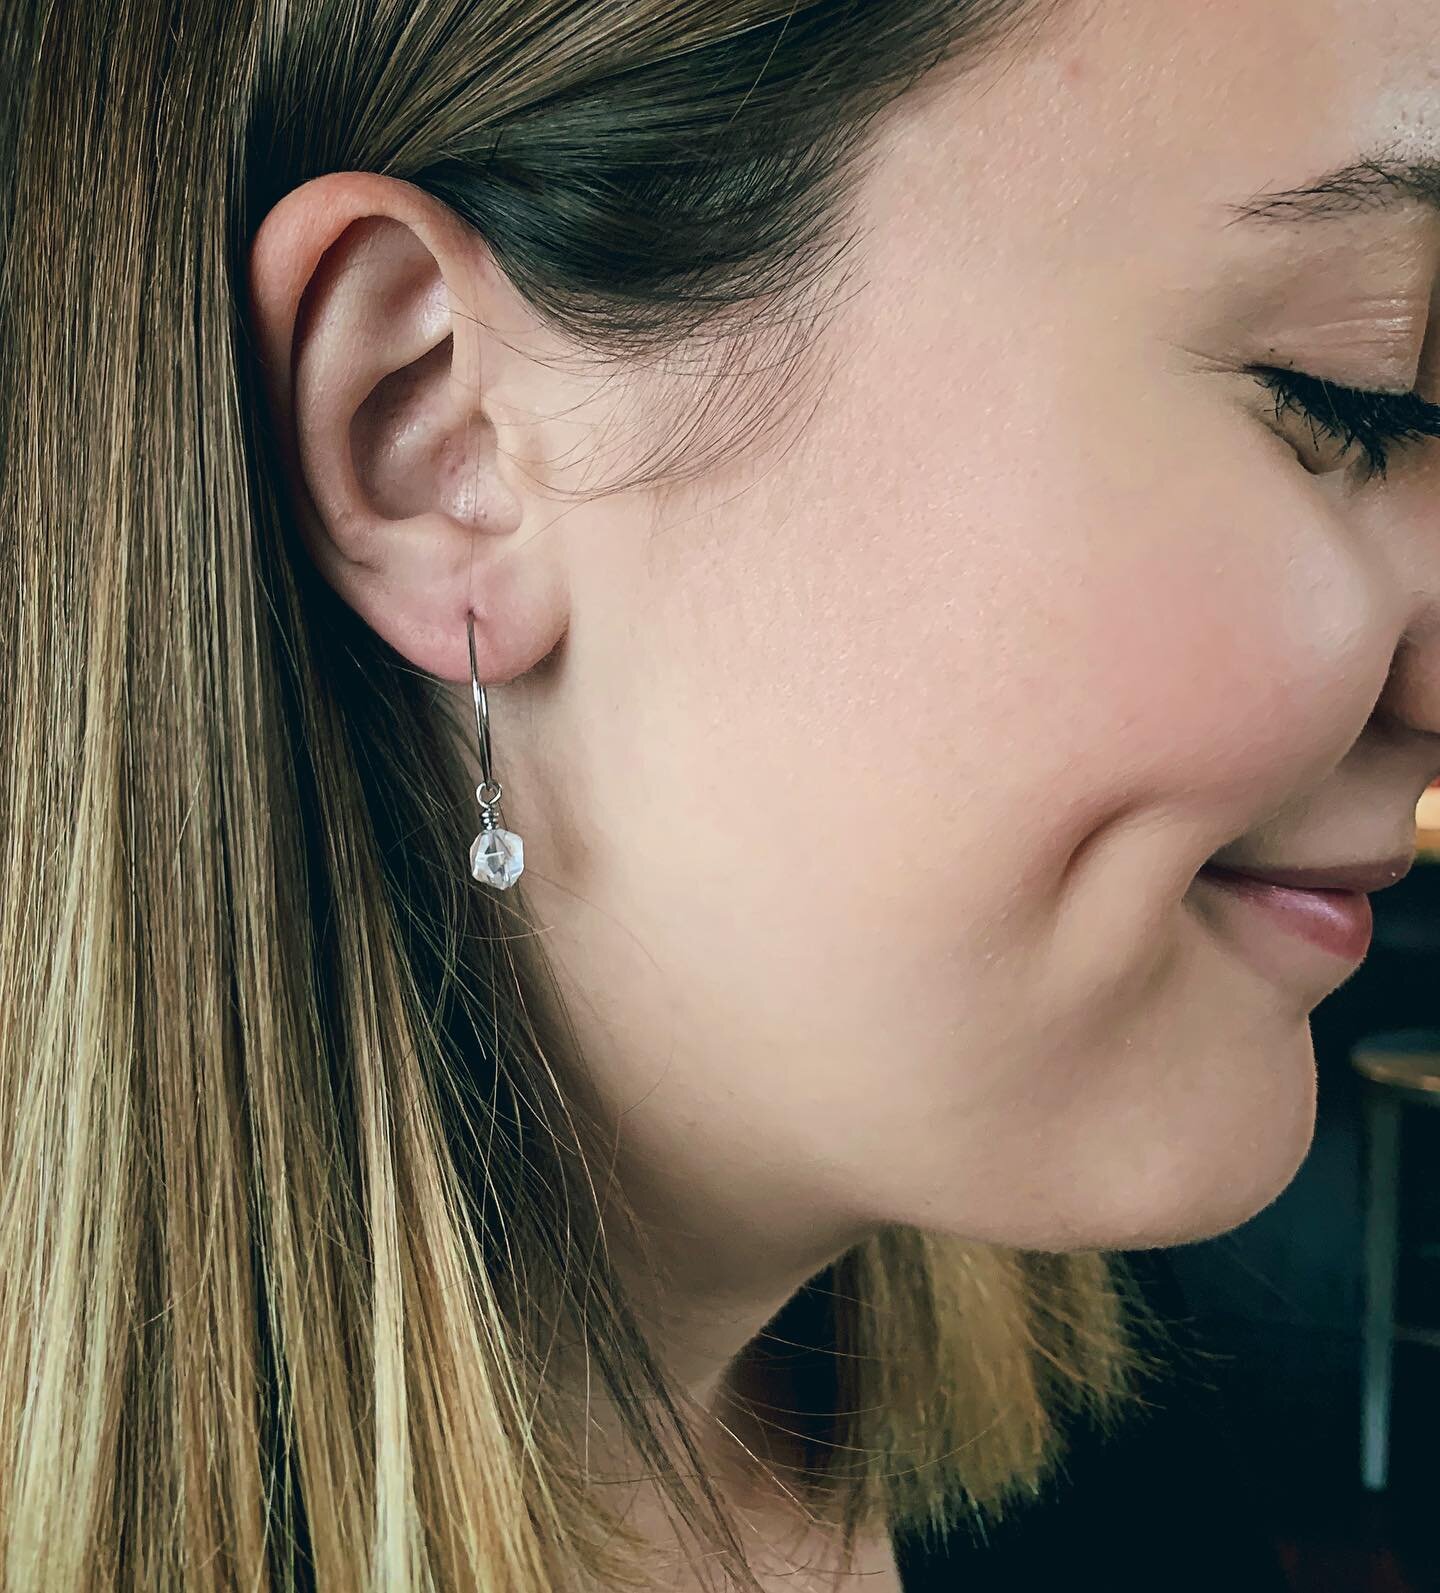 Clear quartz earrings are the perfect accessory for any outfit 🤍
&bull;
Only a few pairs of these cuties left !